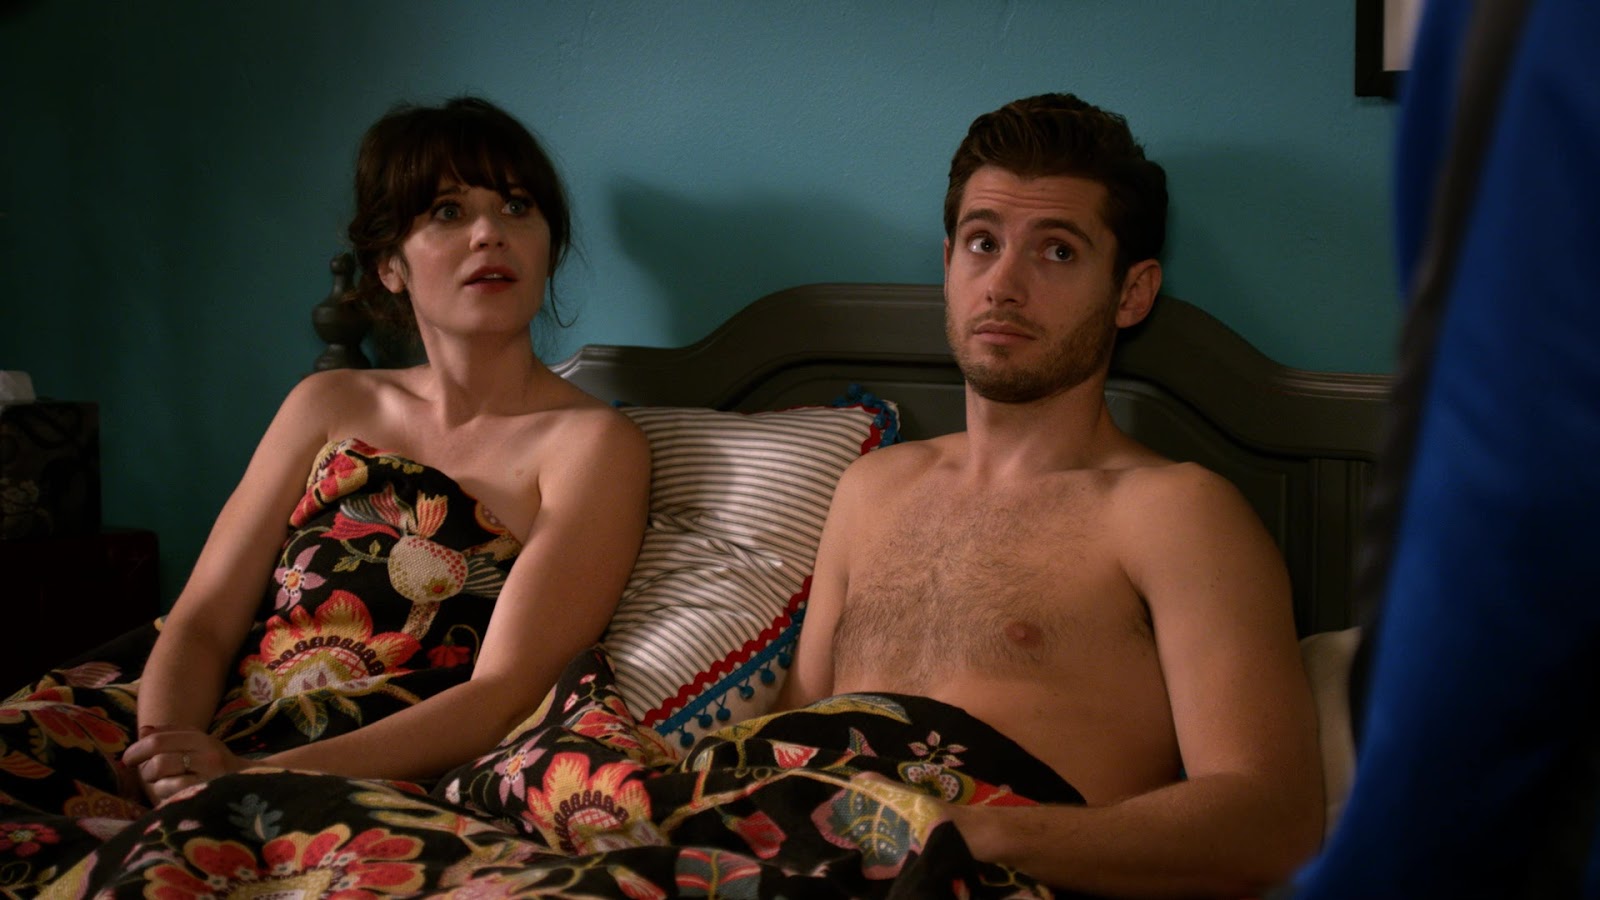 Julian Morris shirtless in New Girl 4-13 "Coming Out" .